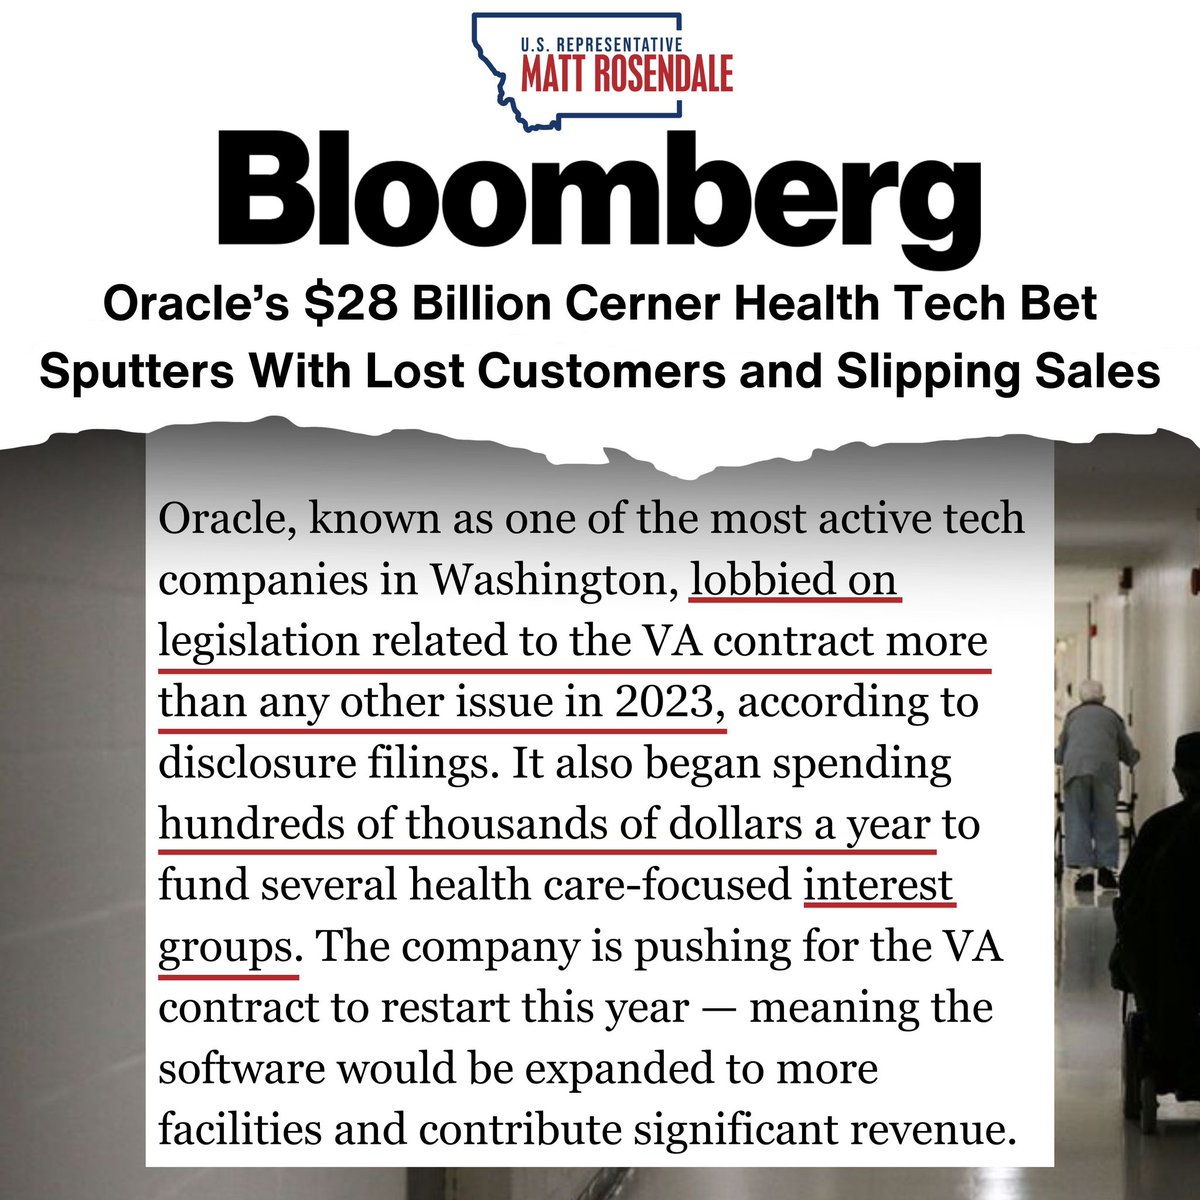 Oracle Cerner’s EHR system at VA medical centers has been a disaster for patient safety and has wasted billions of taxpayer dollars.   Instead of spending money buying off politicians, it’s time Oracle Cerner focus on fixing their software so our nation’s heroes can receive the